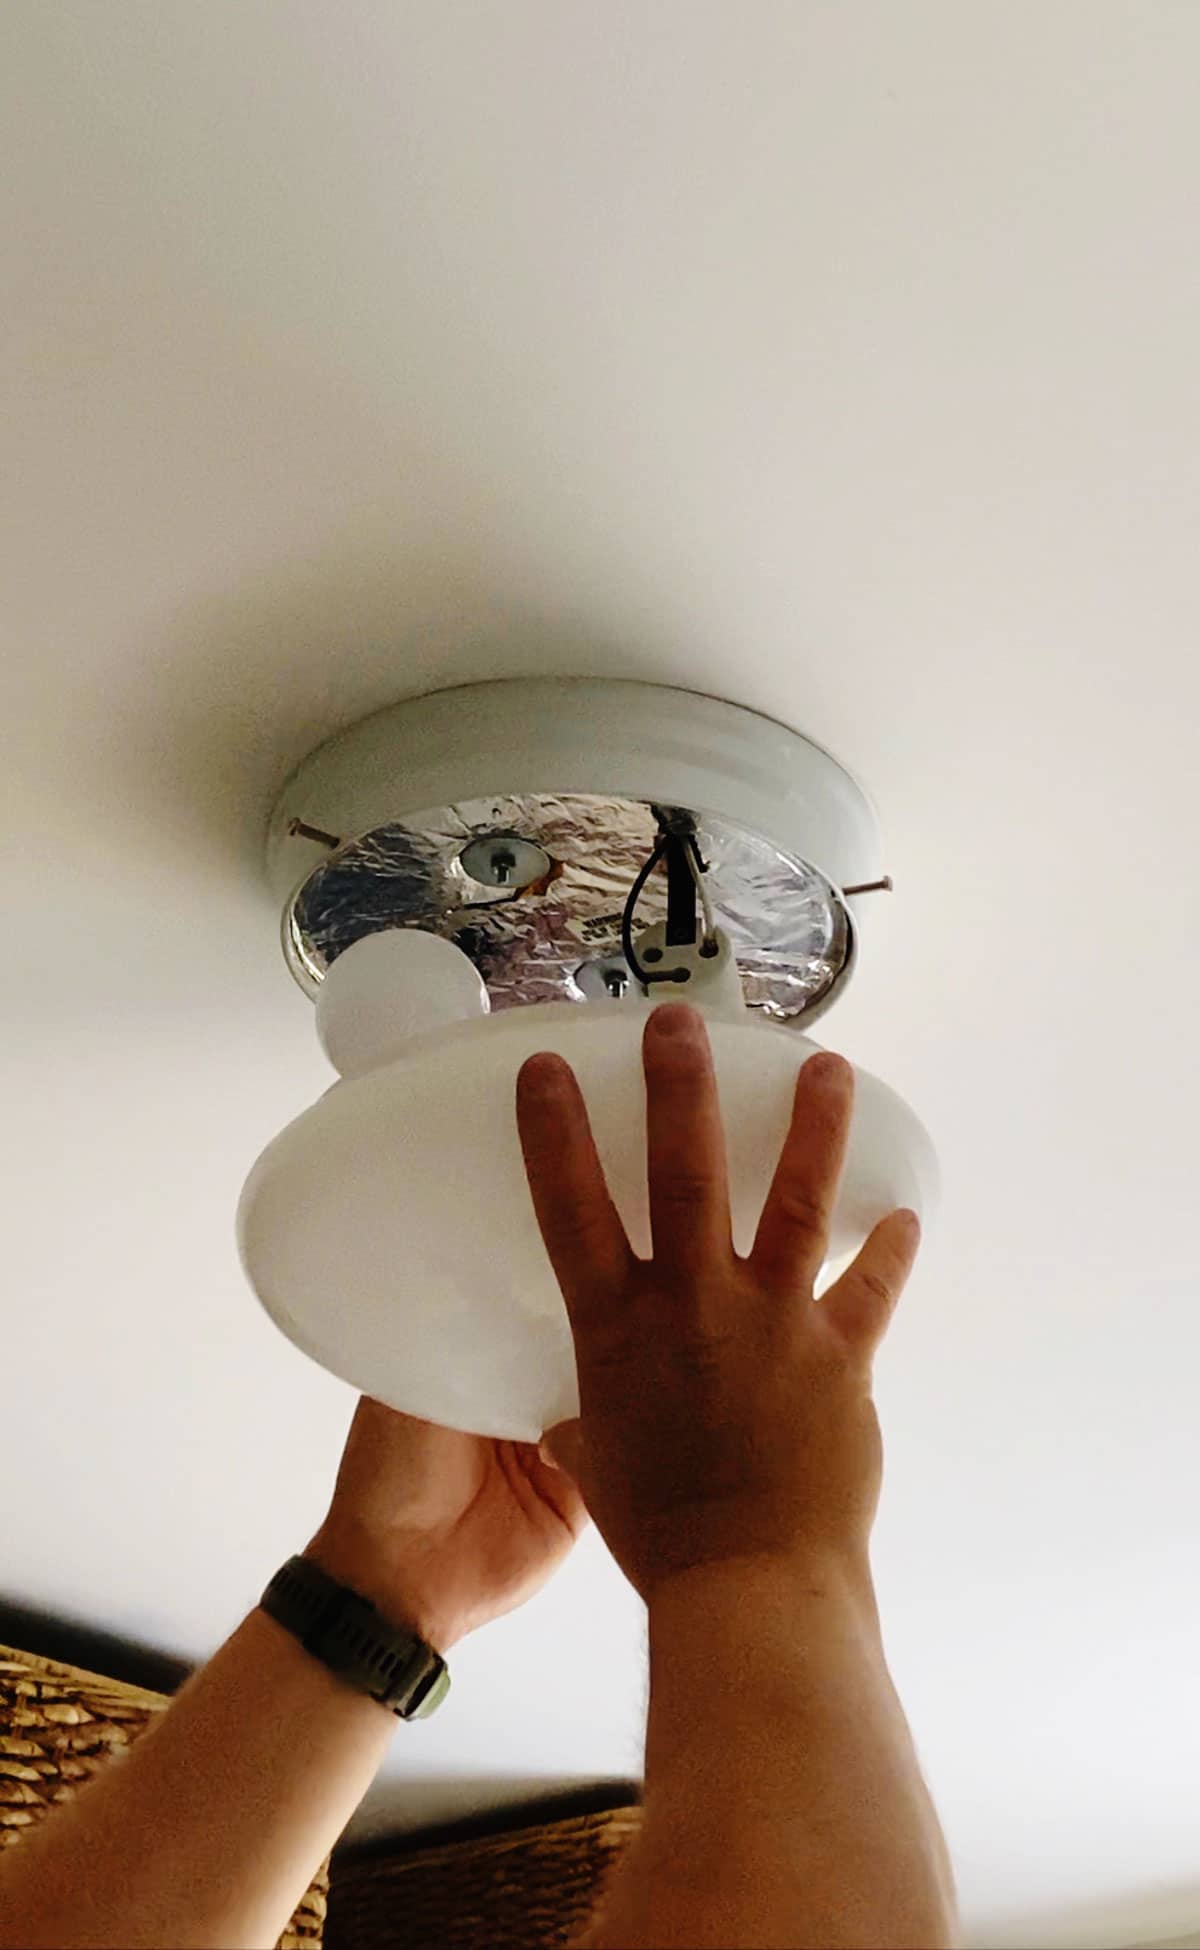 How To Change A Light Fixture In 5 Easy Steps Remove the old ceiling light fixture